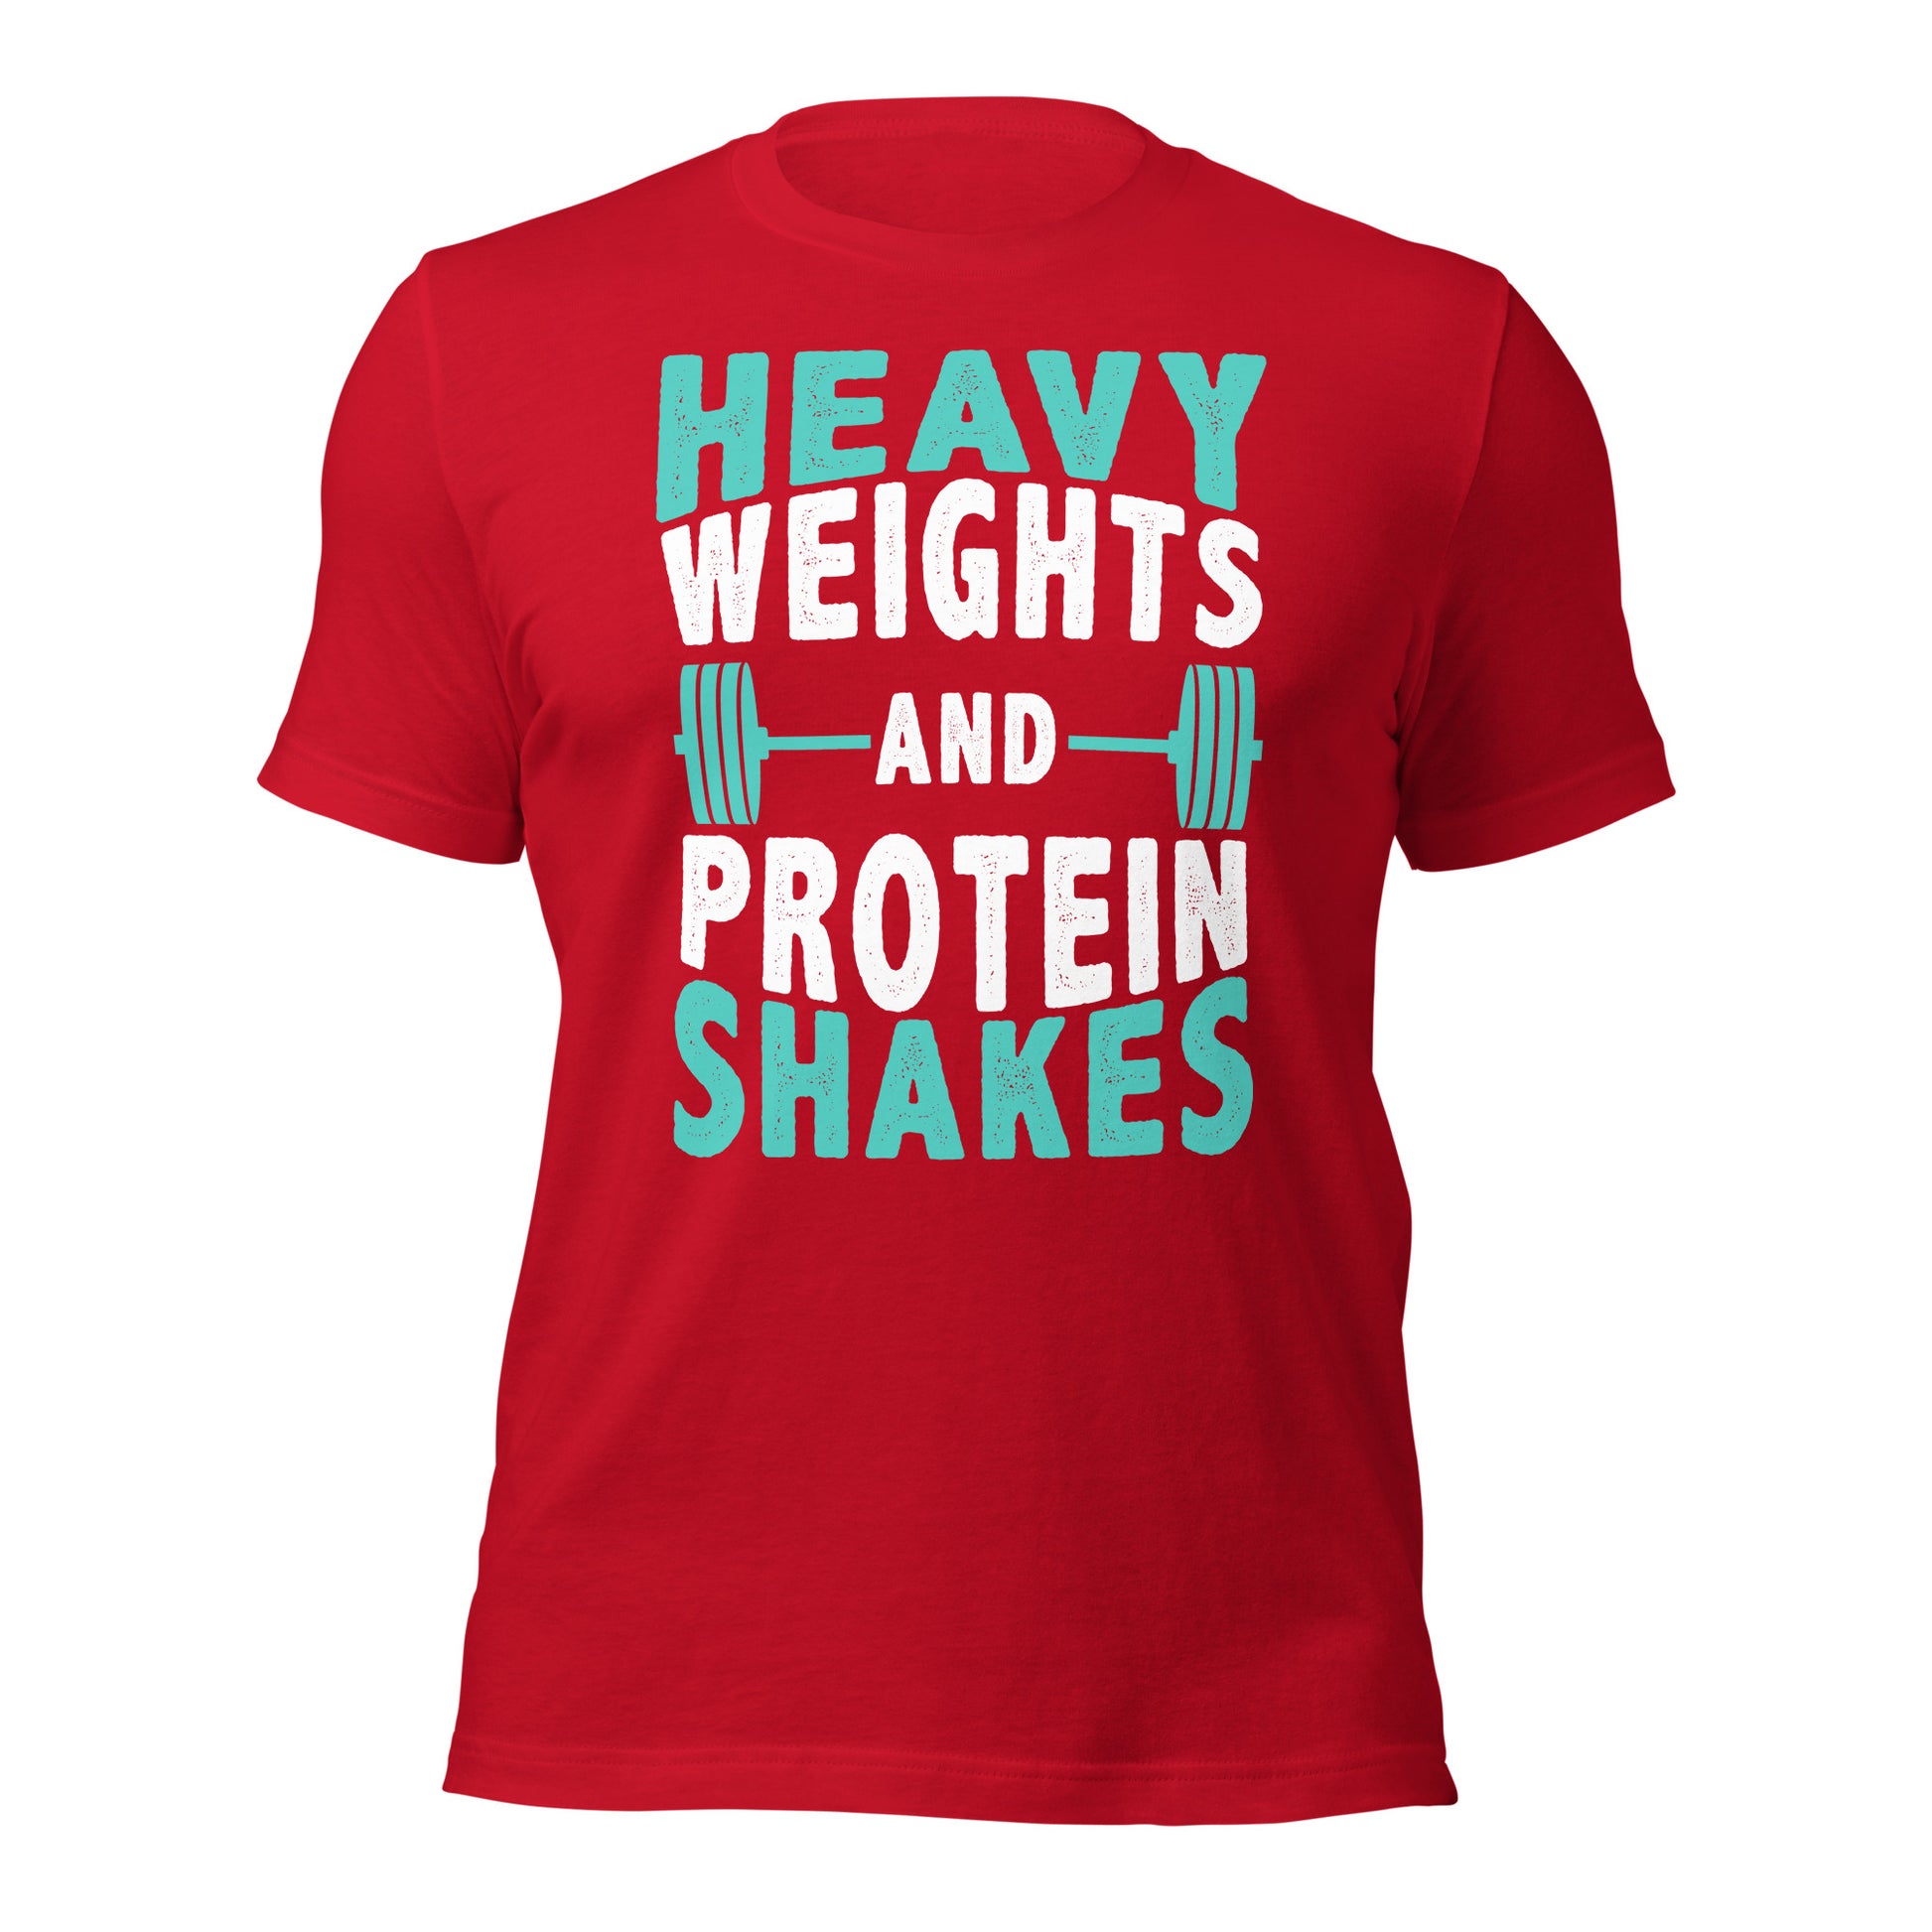 Heavy weights protein shakes tee red